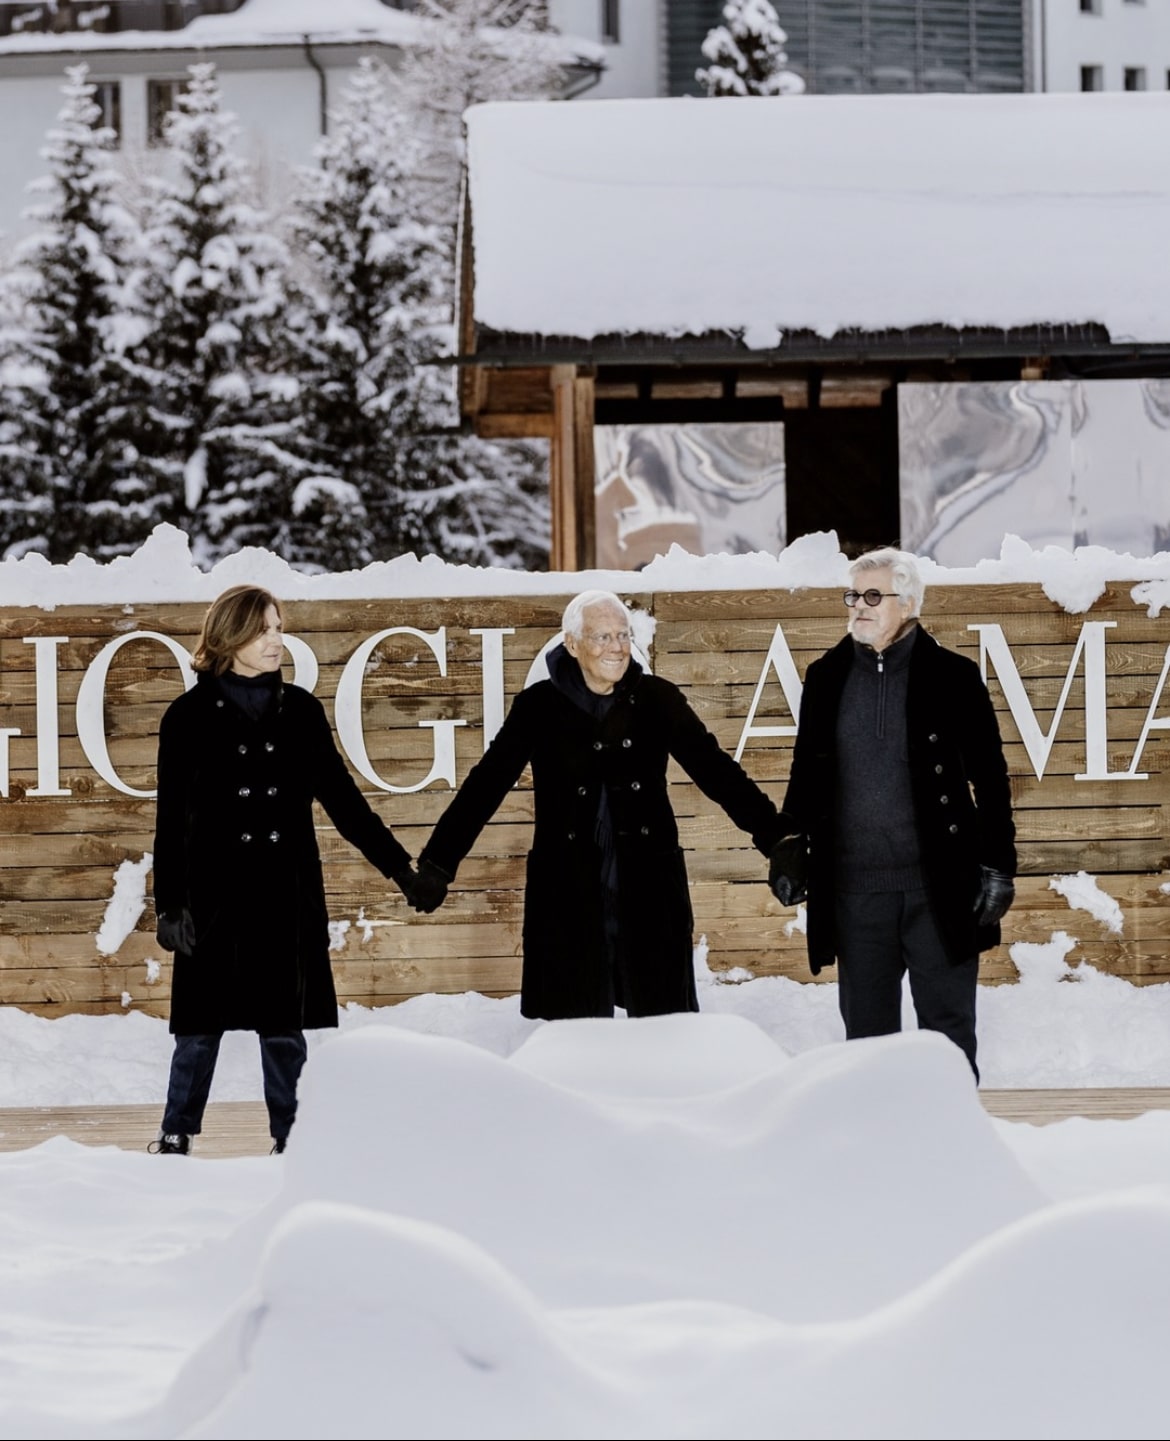 Armani Launches 22/23 Winter Sports Line ‘Armani Neve’ With 3-Day Event in St. Moritz, Switzerland